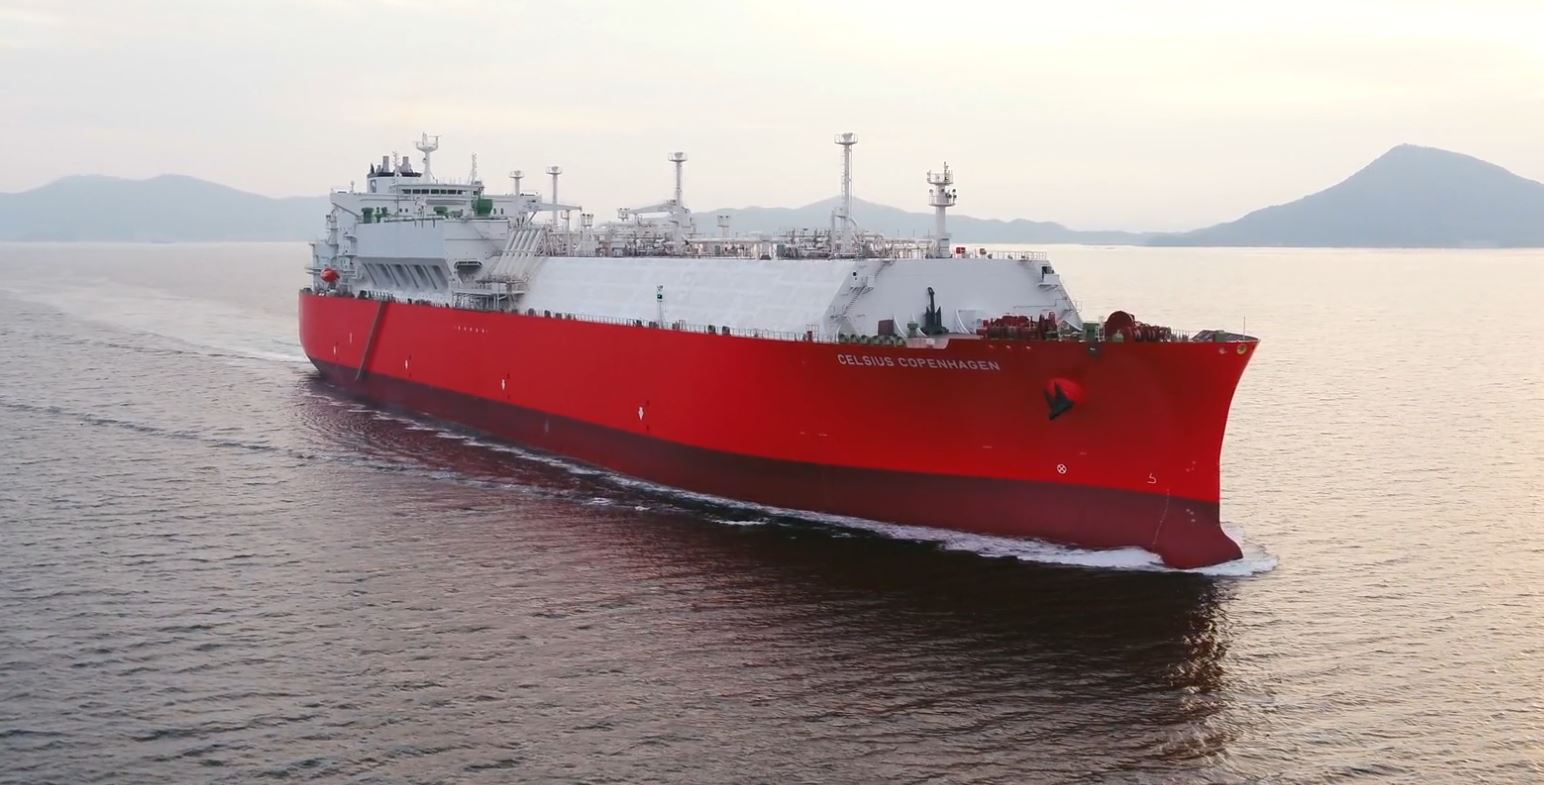 Denmark’s Celsius Tankers has ordered four liquefied natural gas (LNG) carriers at China Merchants Heavy Industry in Jiangsu, according to shipbuilding sources.